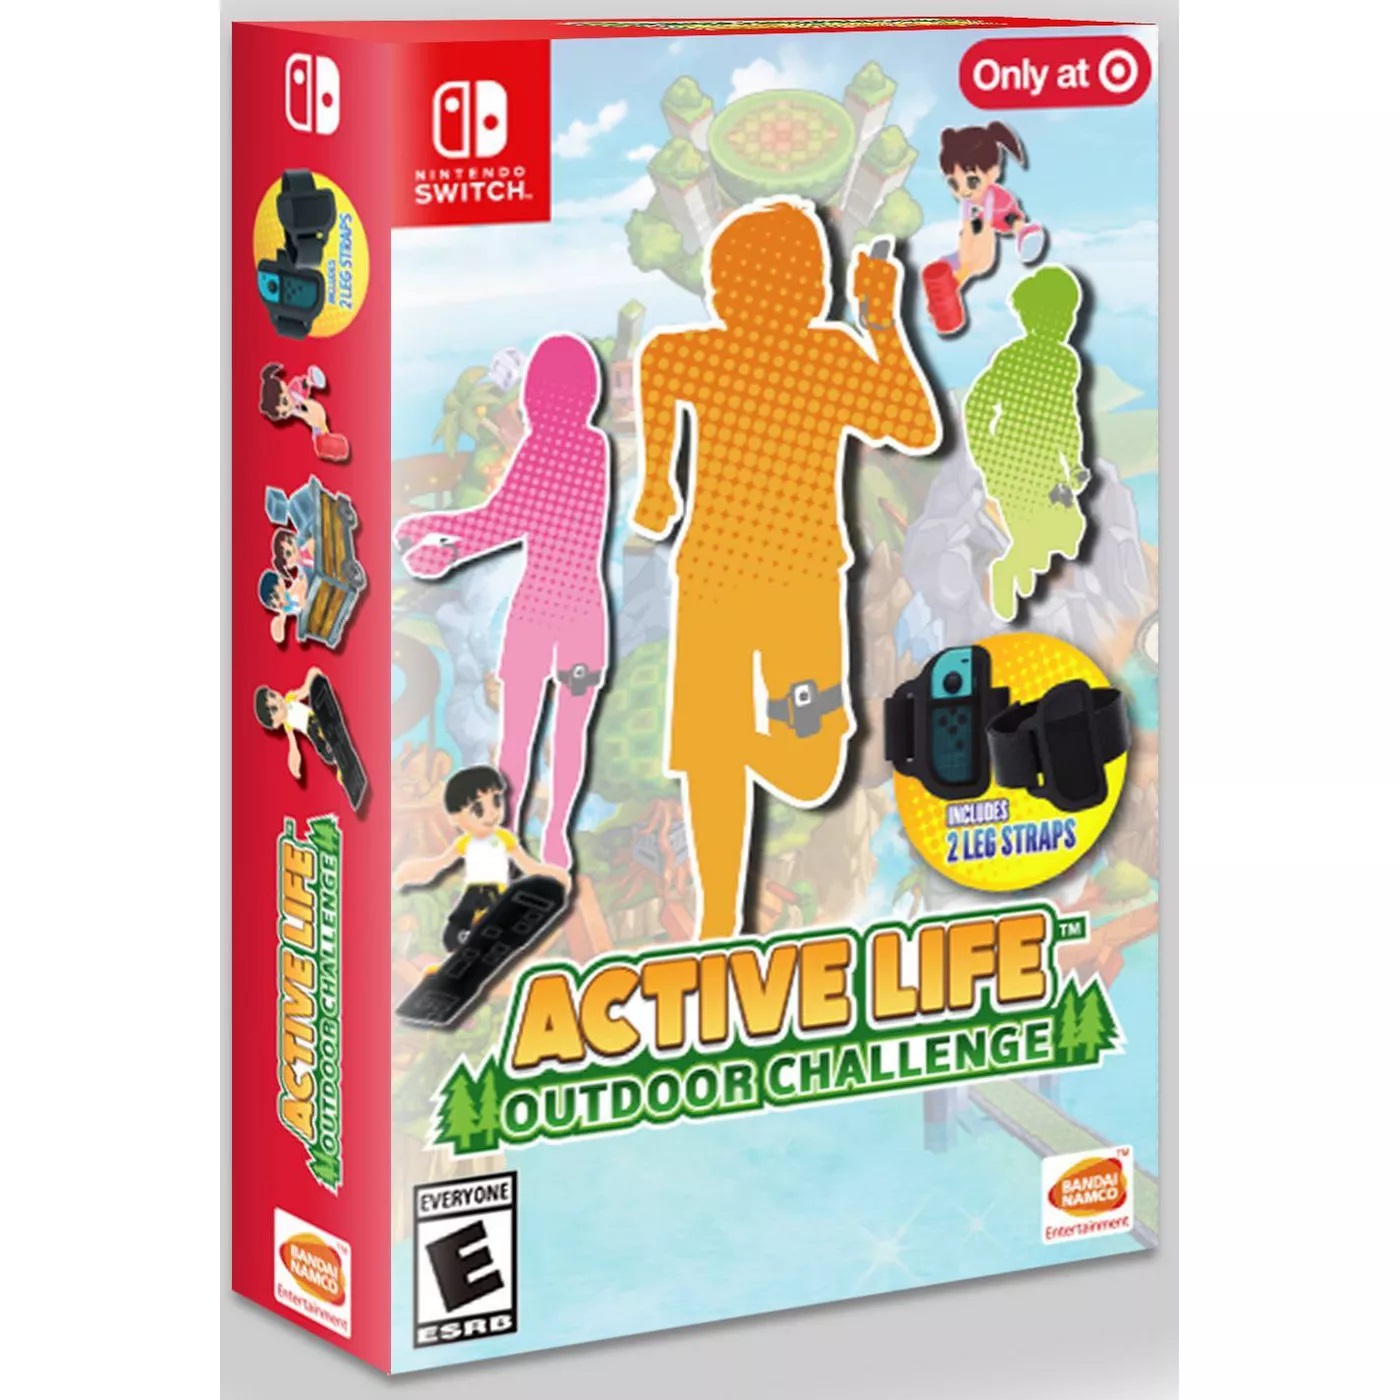 Active Life: Outdoor Challenge is a Target exclusive in the US